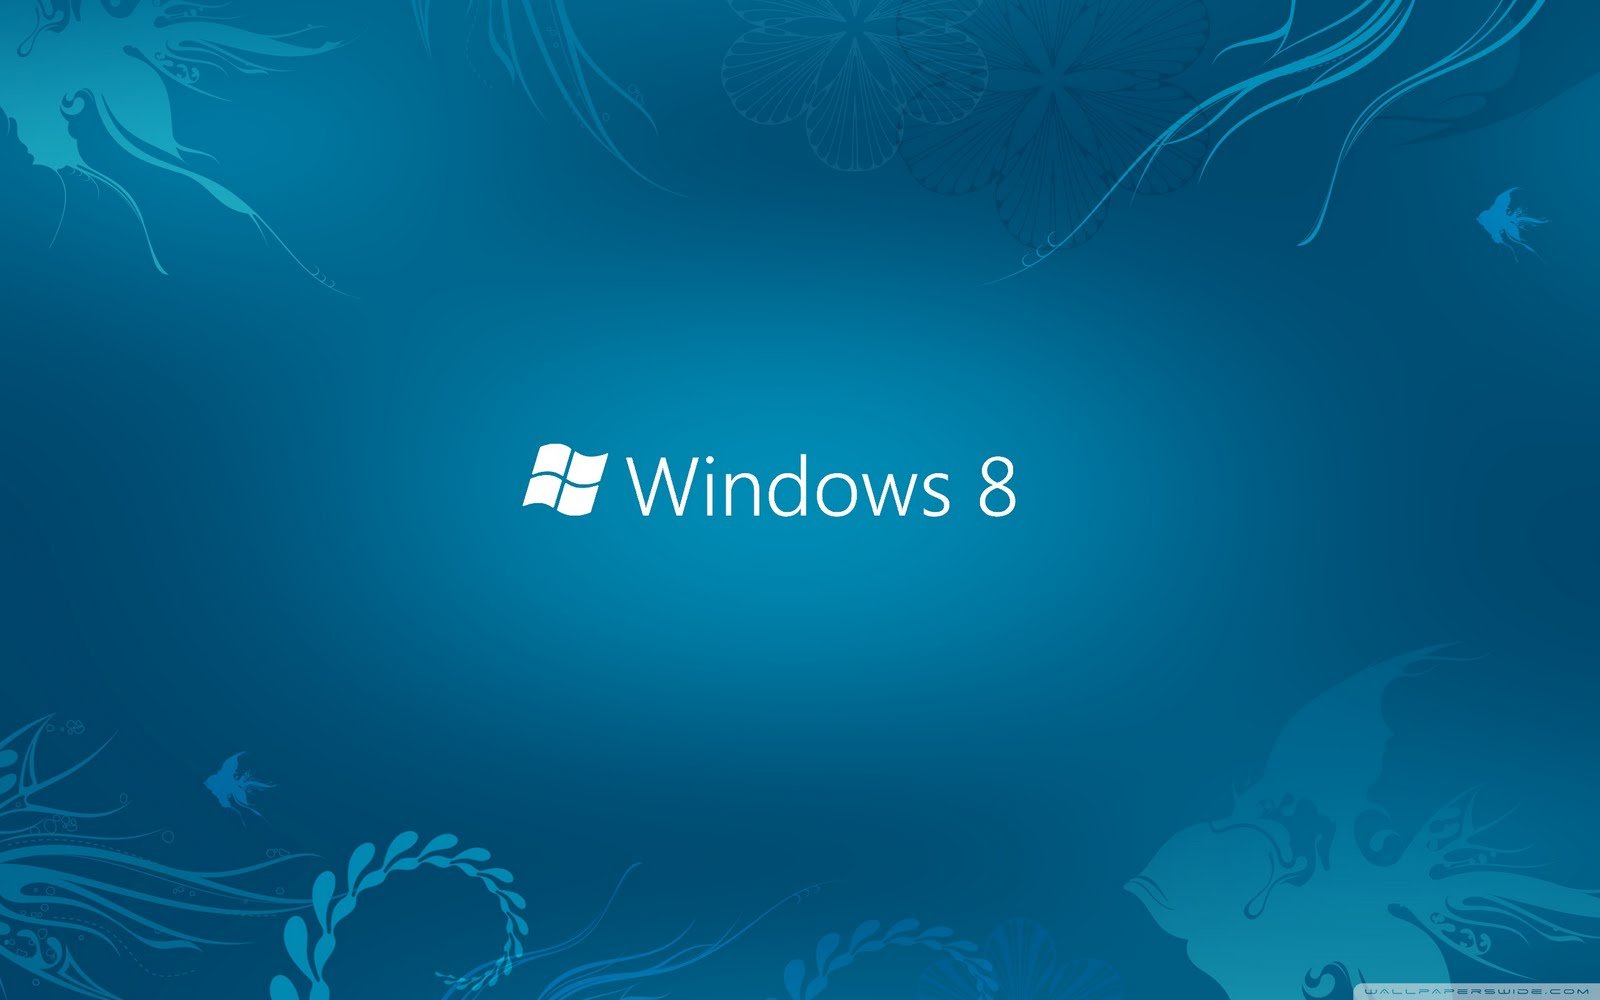 Top 12 Cool Windows 8 HD wallpapers for desktop backgrounds 81 600x375 1600x1000